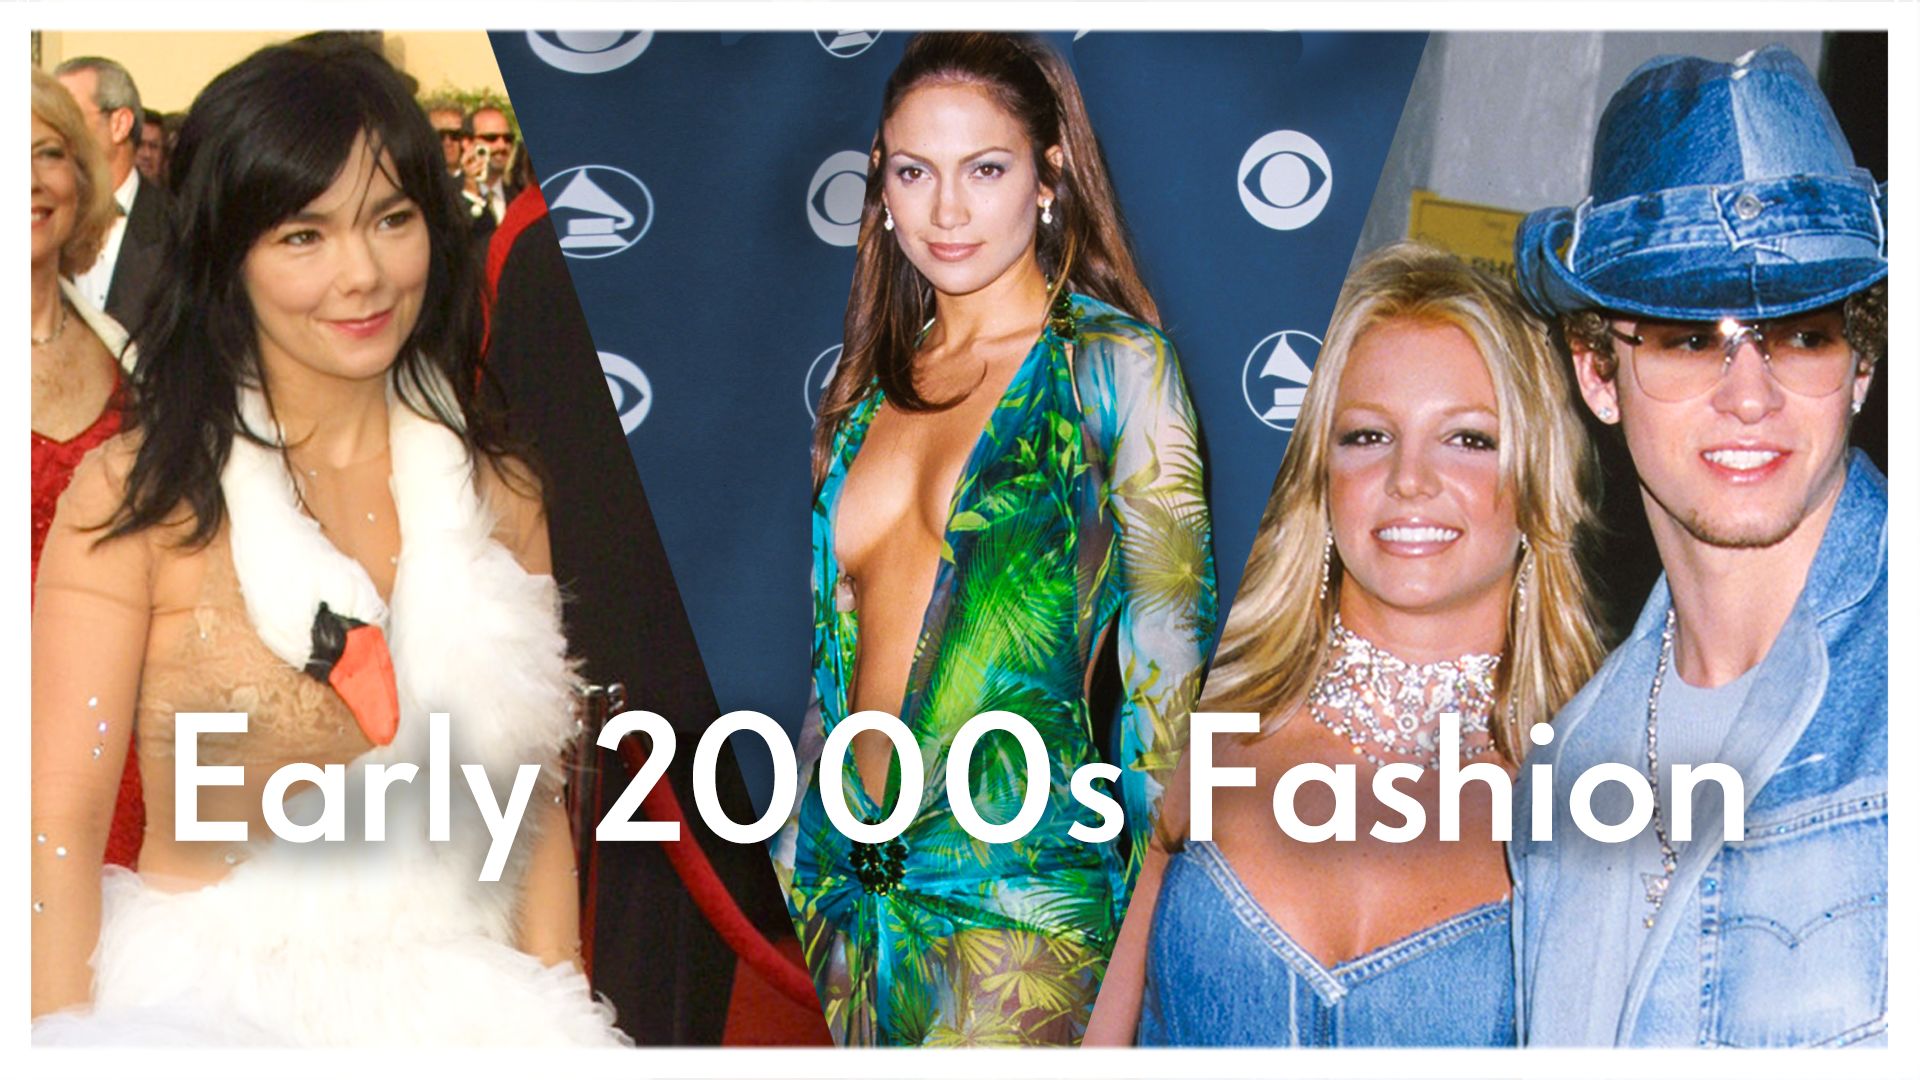 Y2k Fashion: Best Celebrity Outfits From the Early 2000s